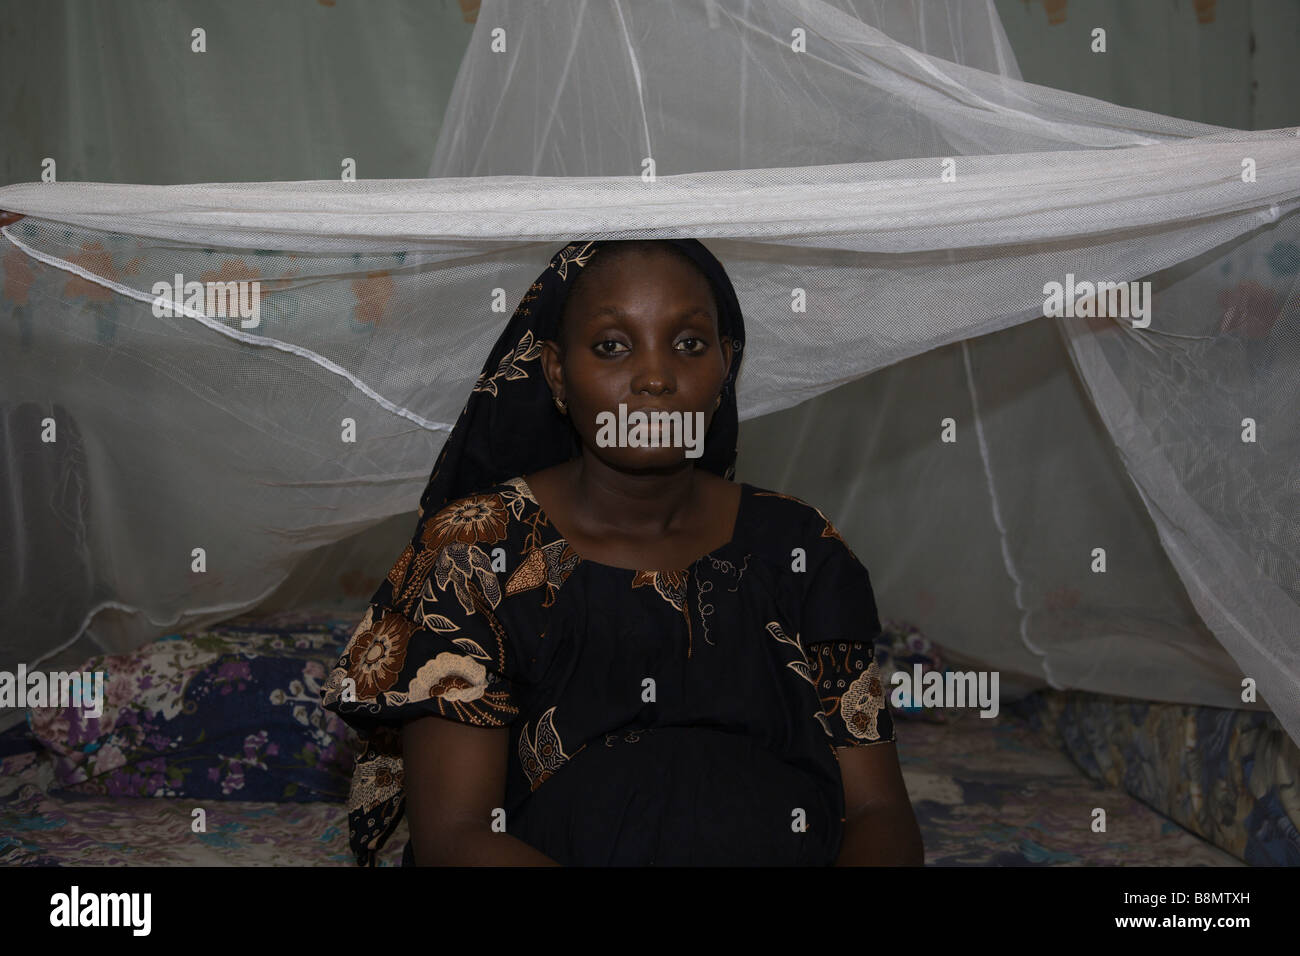 A pregnant woman sleeps under a mosquito net every night, preventing malaria, which is transmitted through mosquito bites. Stock Photo